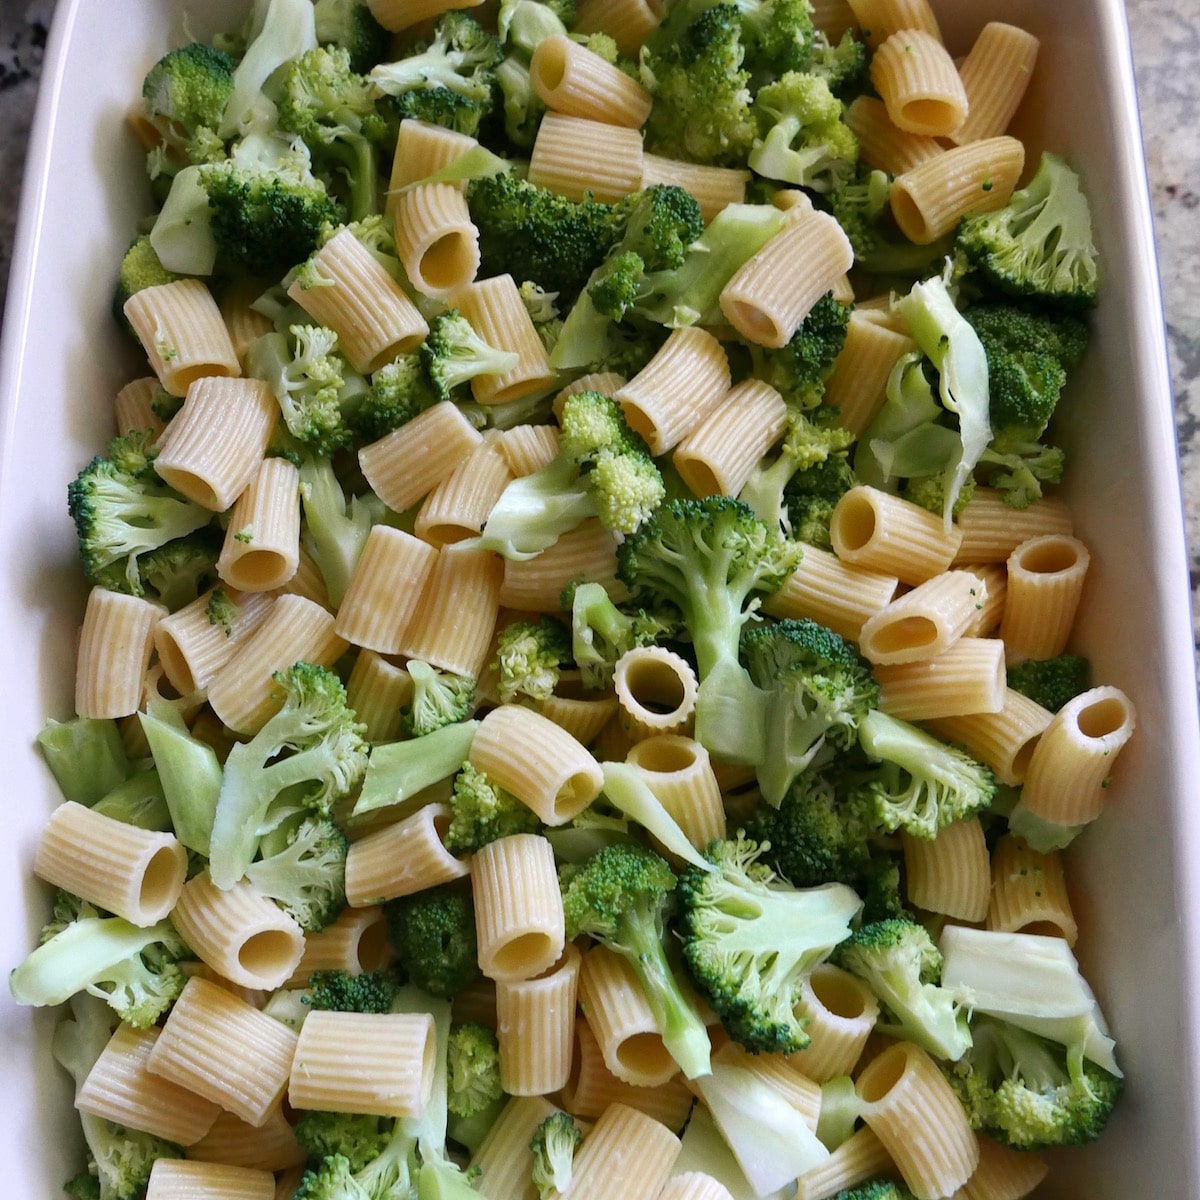 Cooked broccoli and pasta spread into a baking dish.